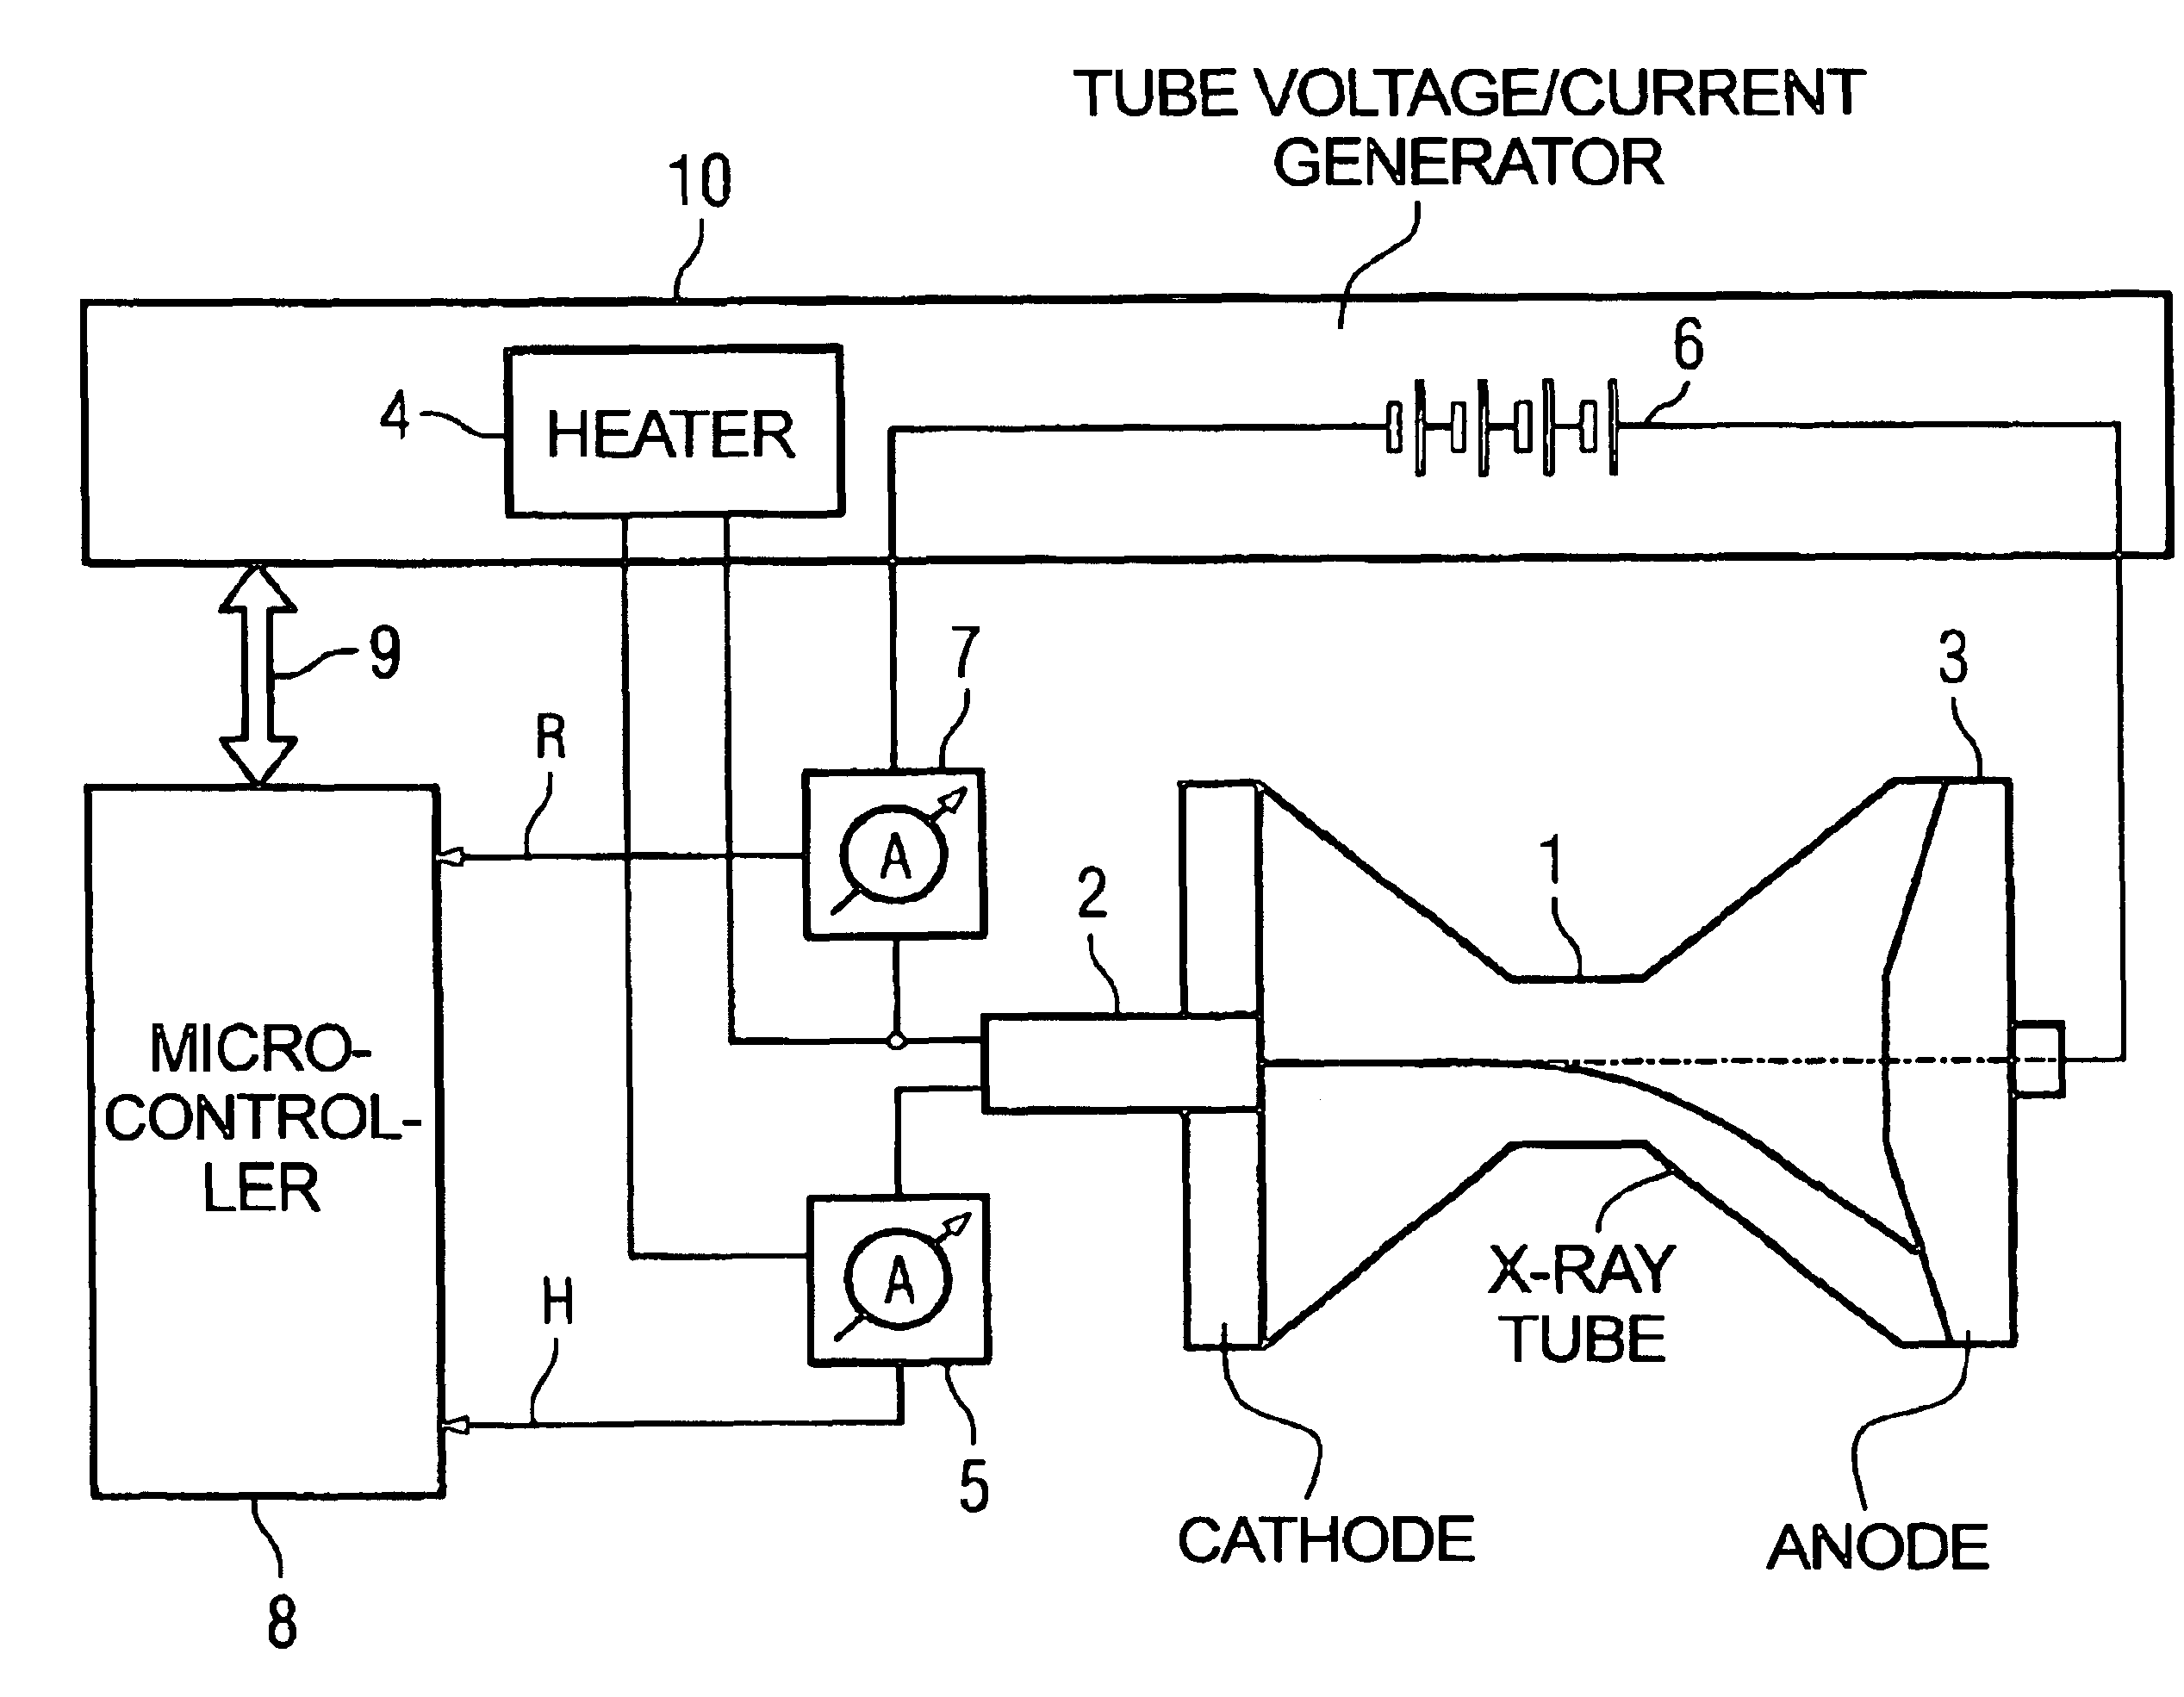 Device to detect pressure in an x-ray tube